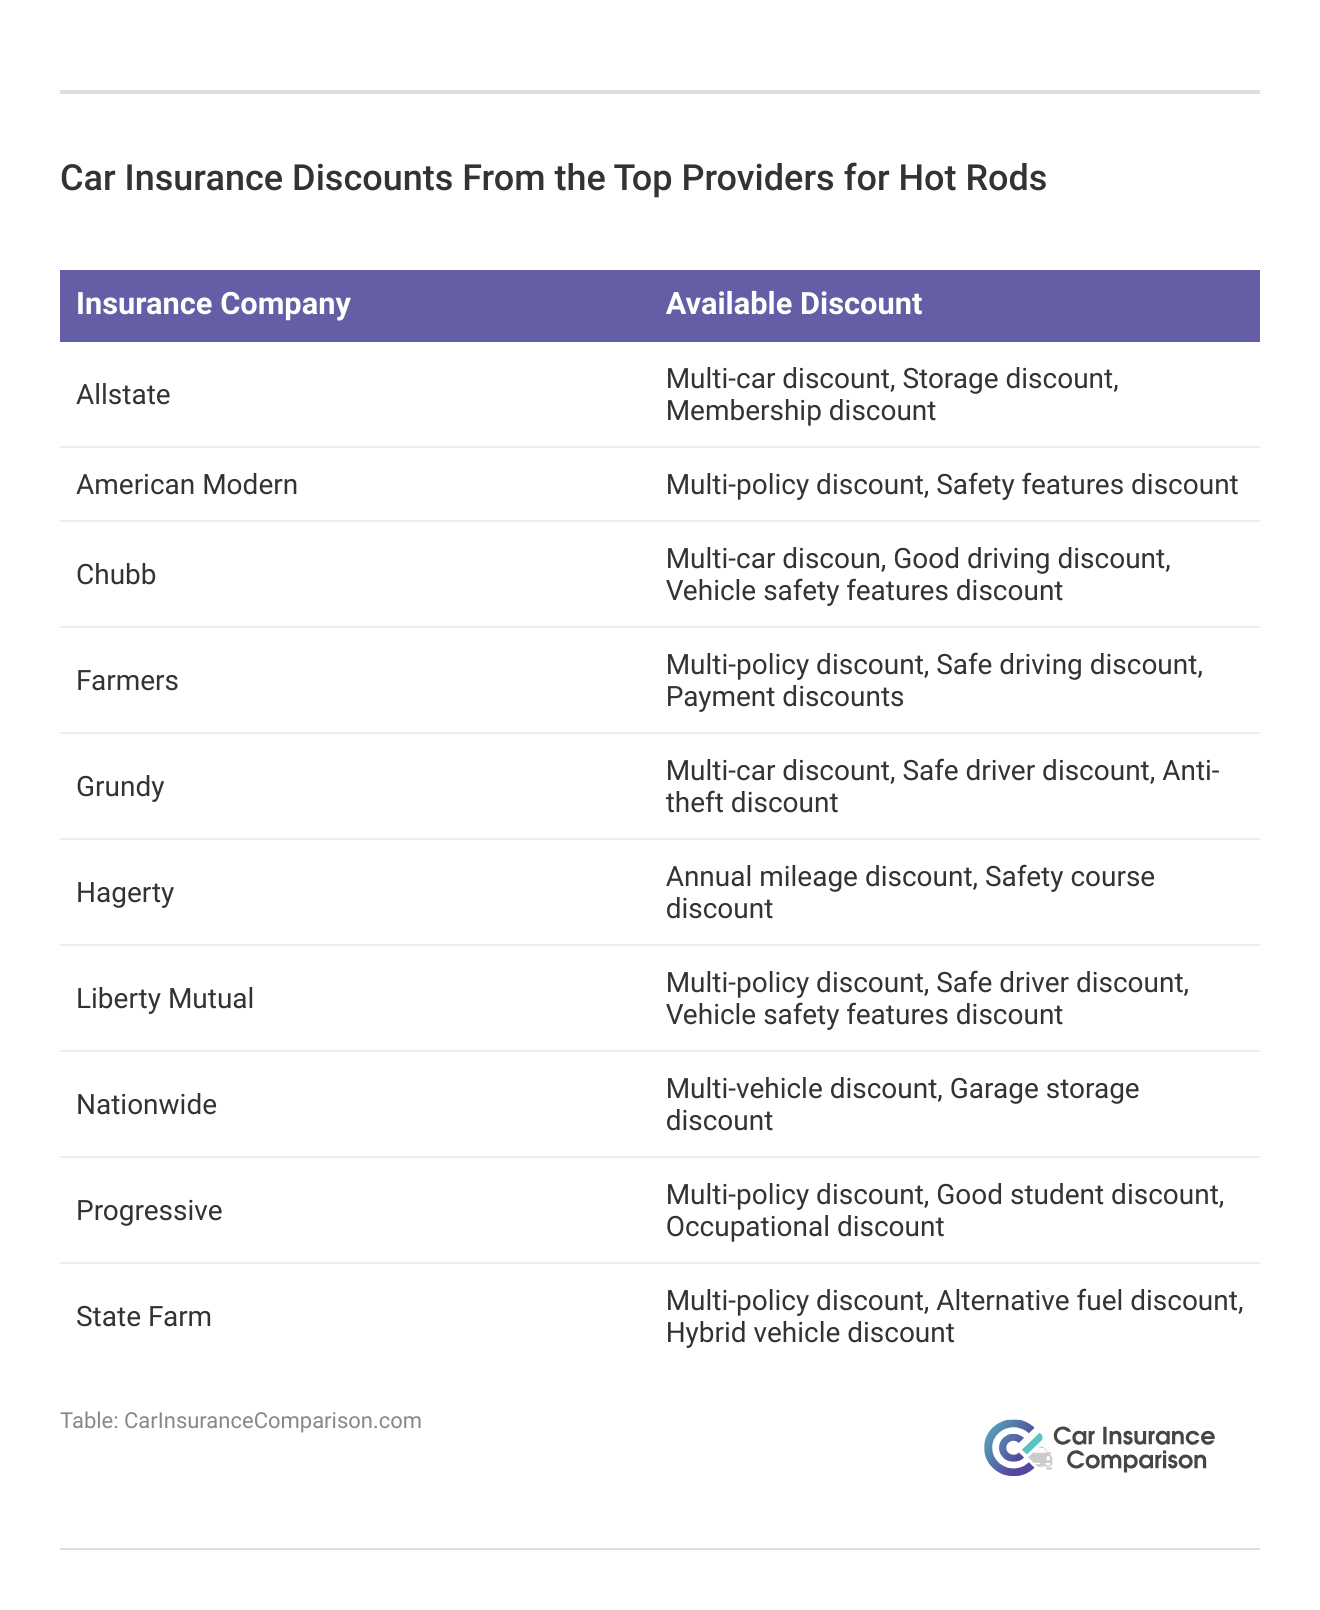 <h3>Car Insurance Discounts From the Top Providers for Hot Rods</h3>